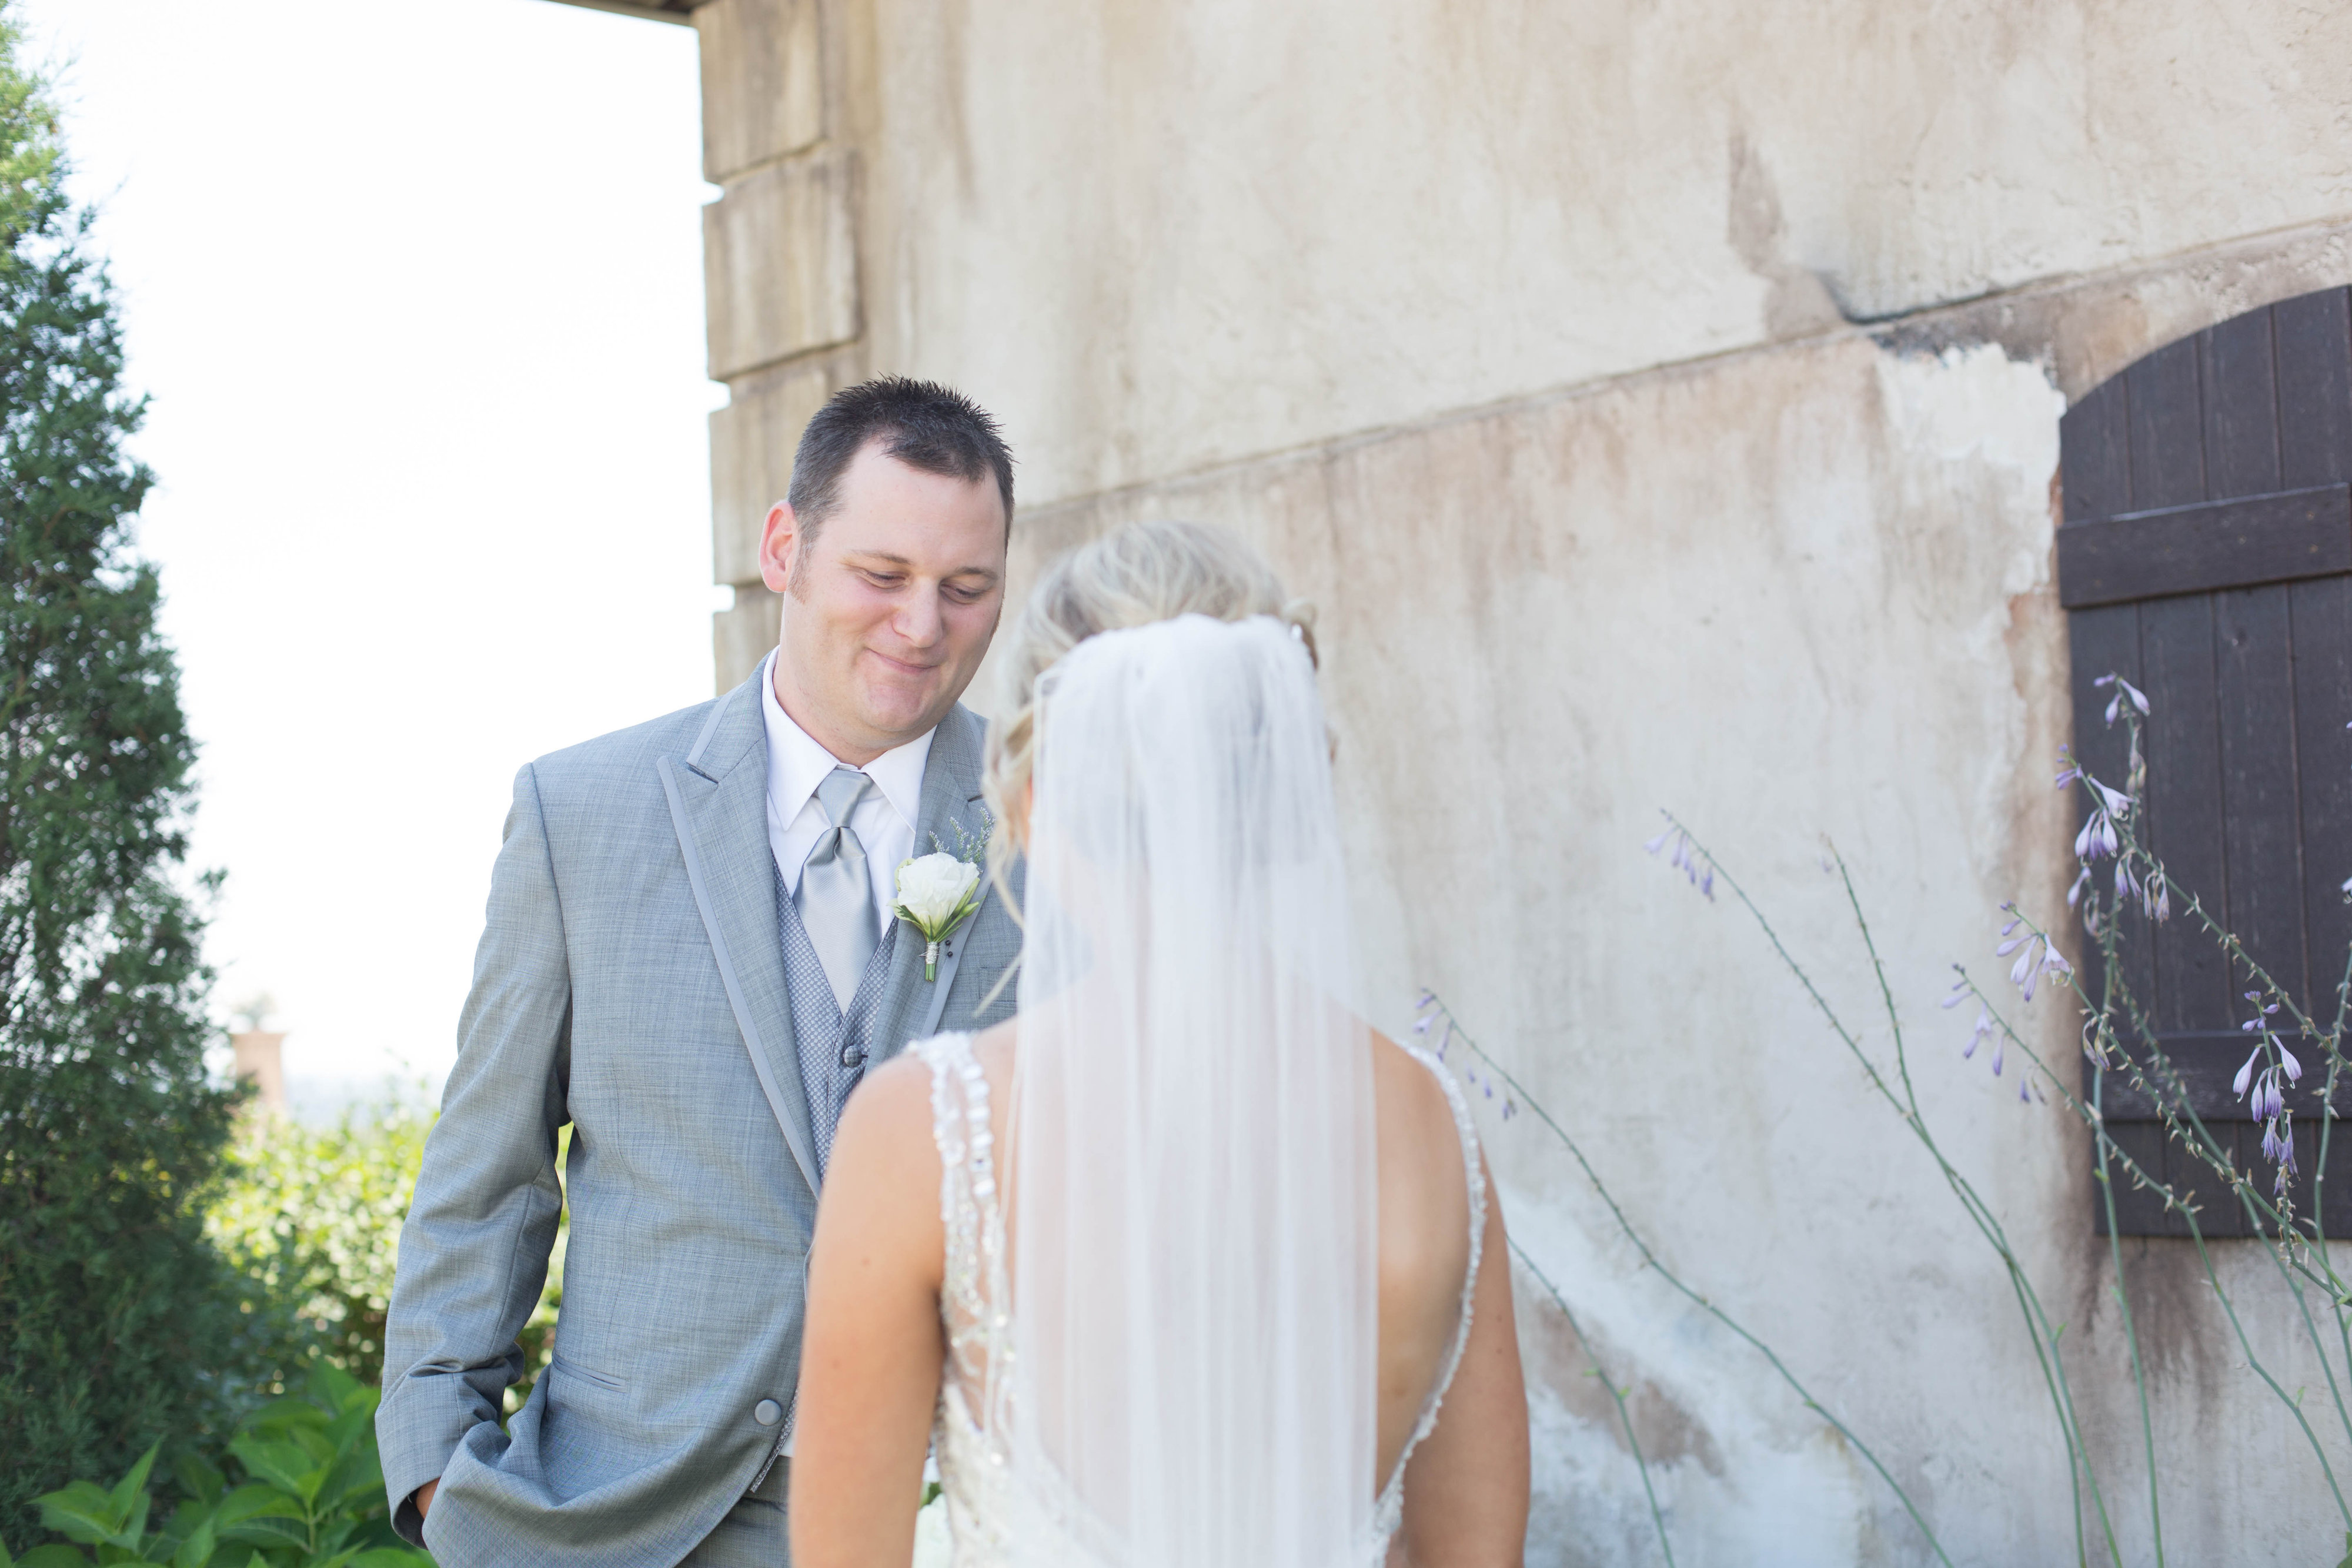 View More: http://tulleandgrace.pass.us/stacy-wedding